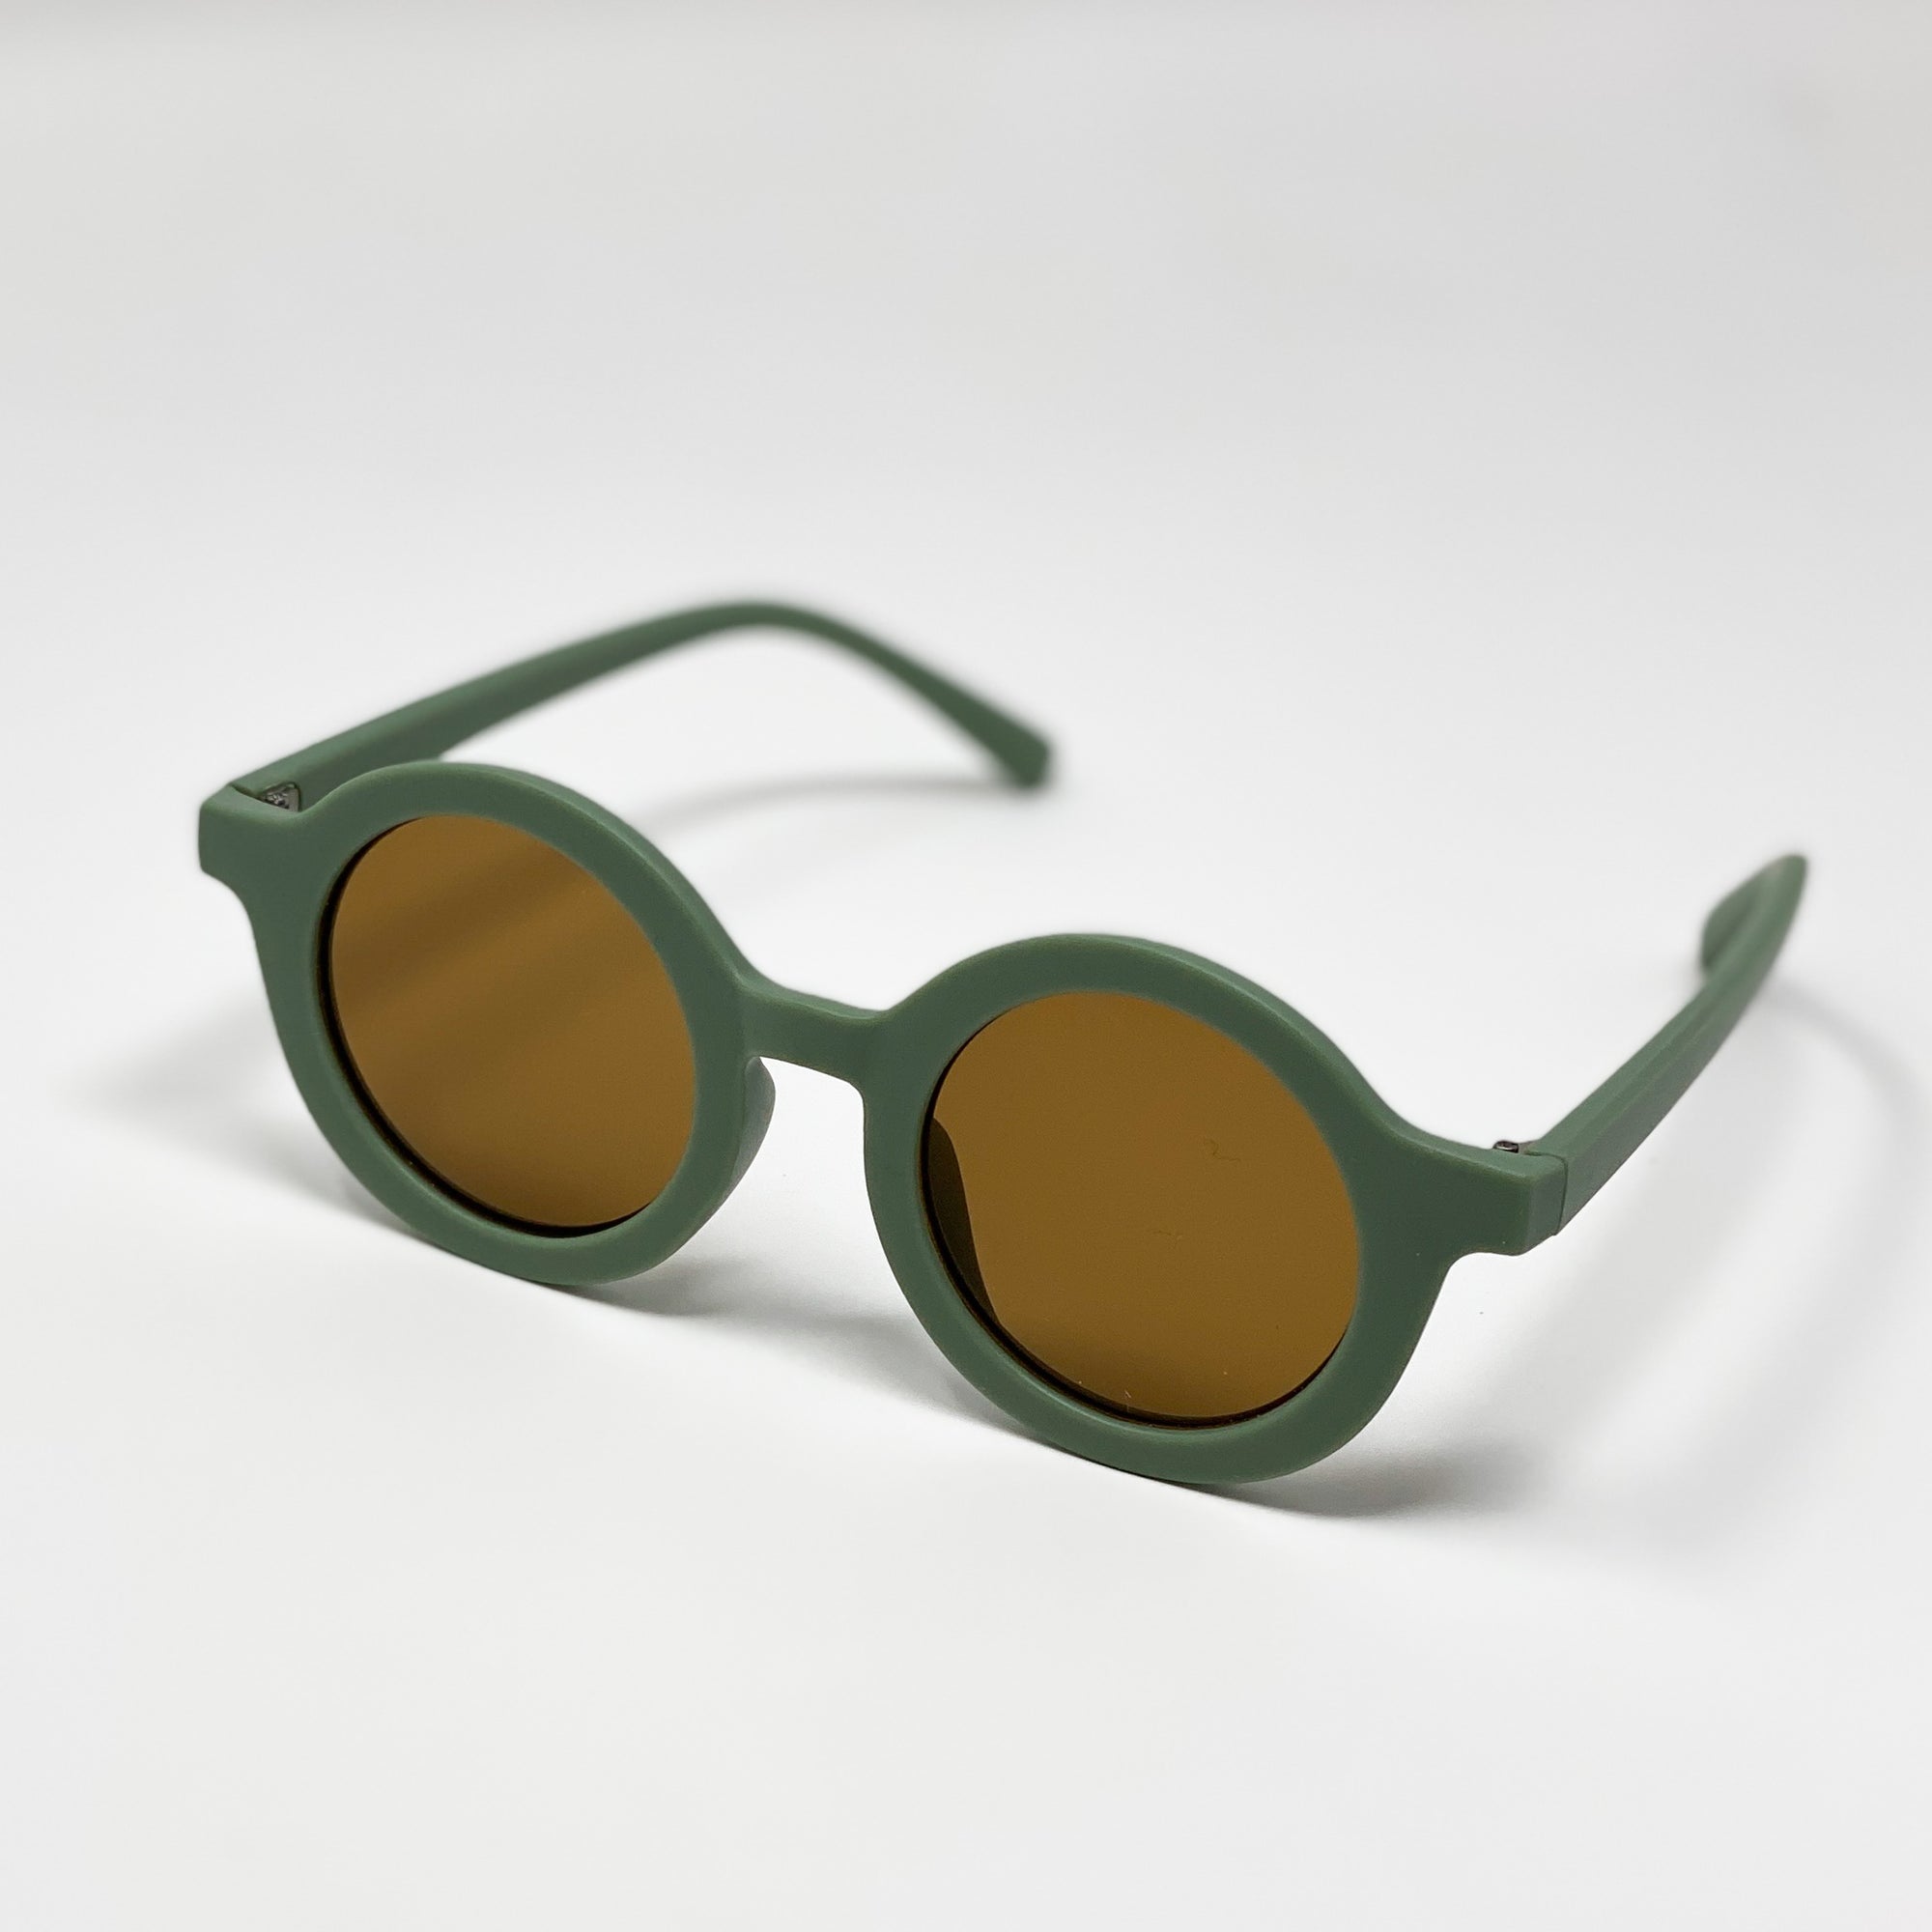 sustainable sunglasses in sage